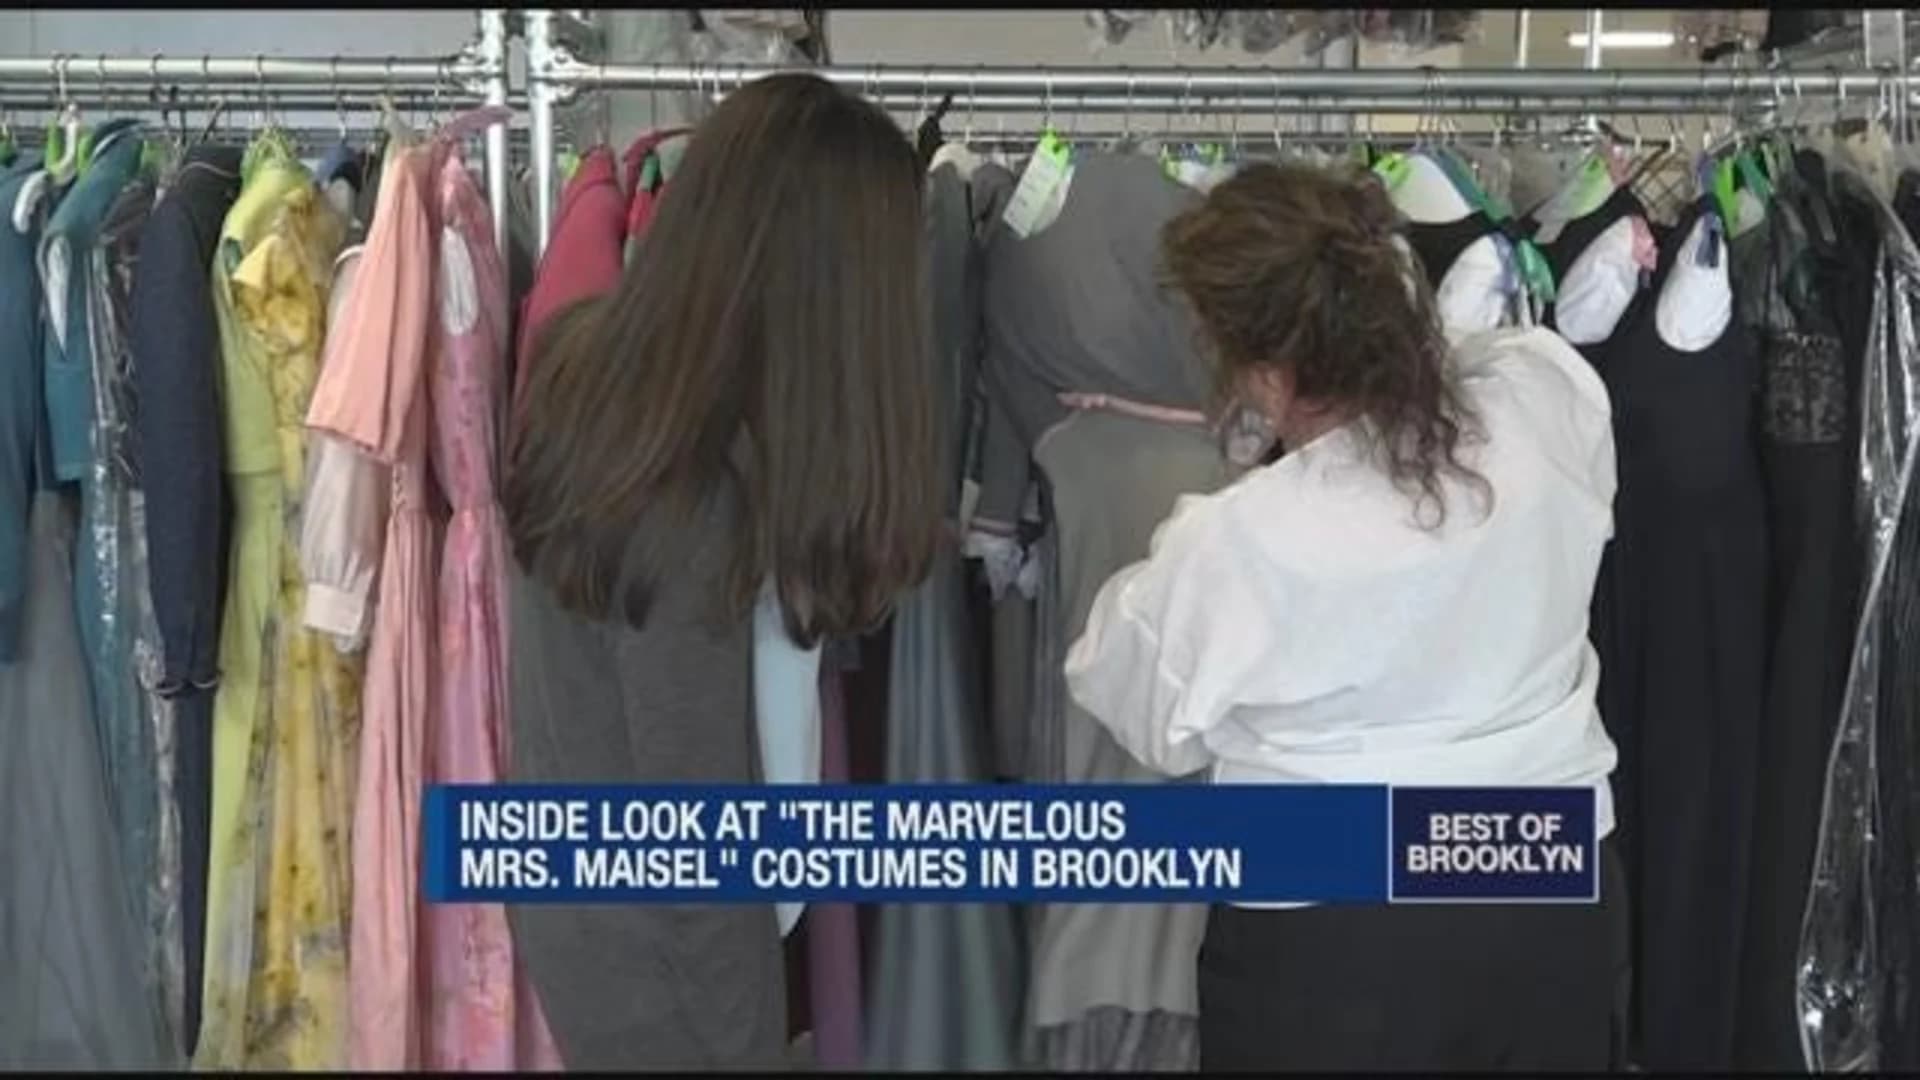 Best of Brooklyn: Inside look at 'Marvelous Mrs. Maisel' costumes